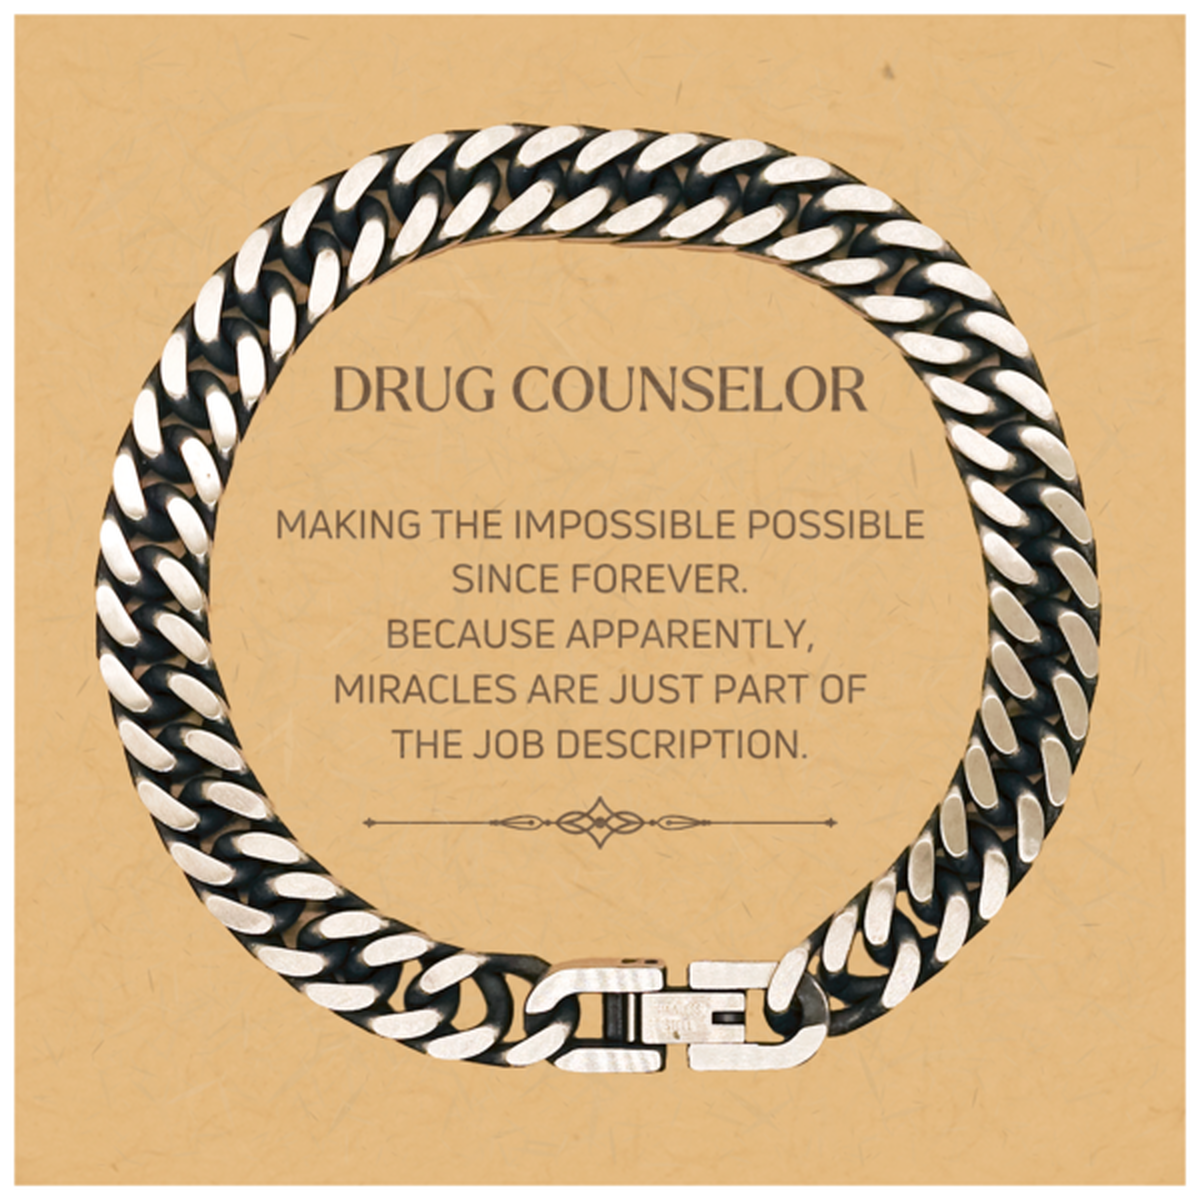 Funny Drug Counselor Gifts, Miracles are just part of the job description, Inspirational Birthday Christmas Cuban Link Chain Bracelet For Drug Counselor, Men, Women, Coworkers, Friends, Boss